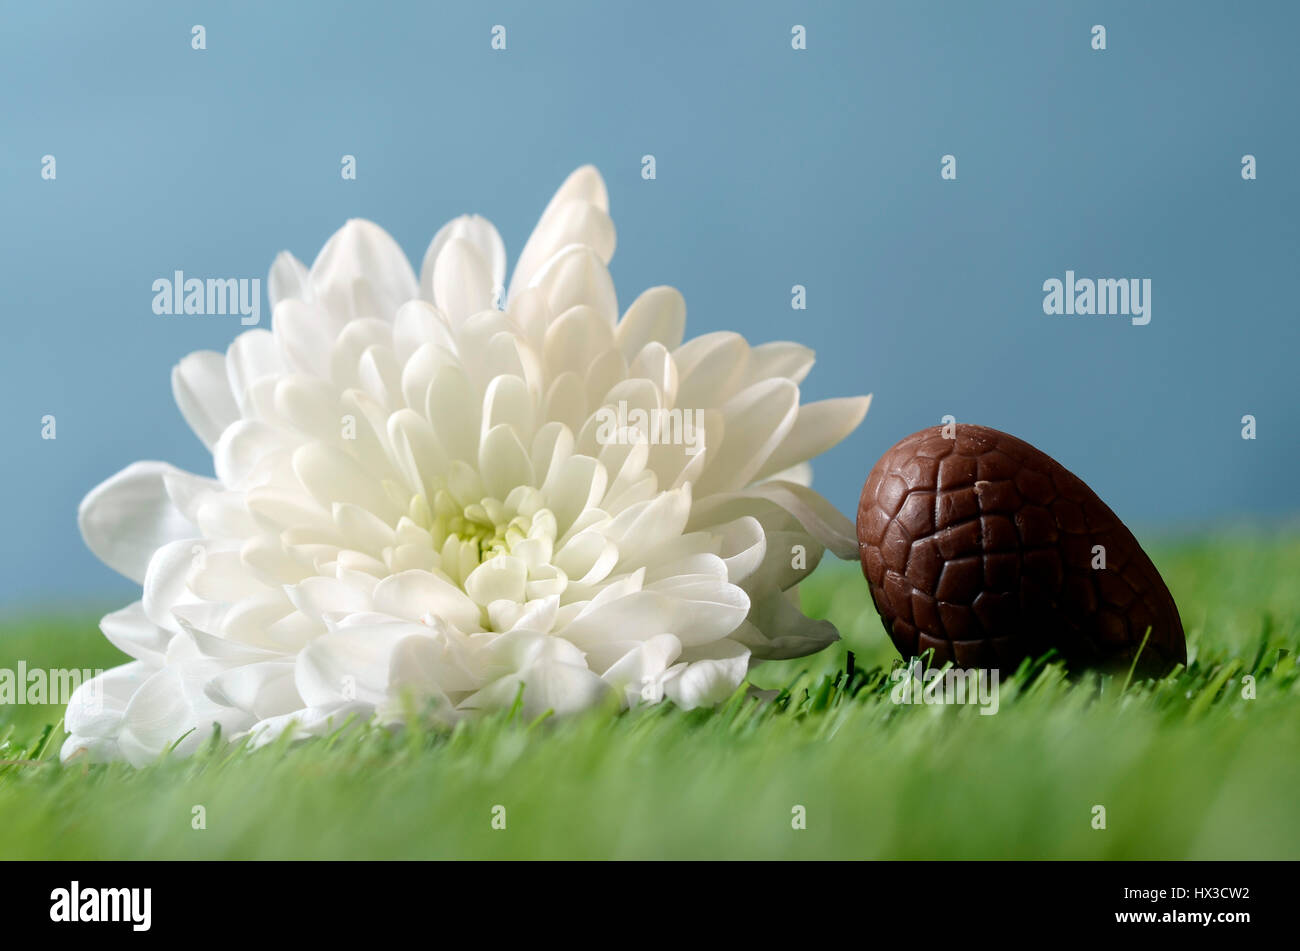 Easter chocolate eggs and gardening scene with white flower and green grass Stock Photo